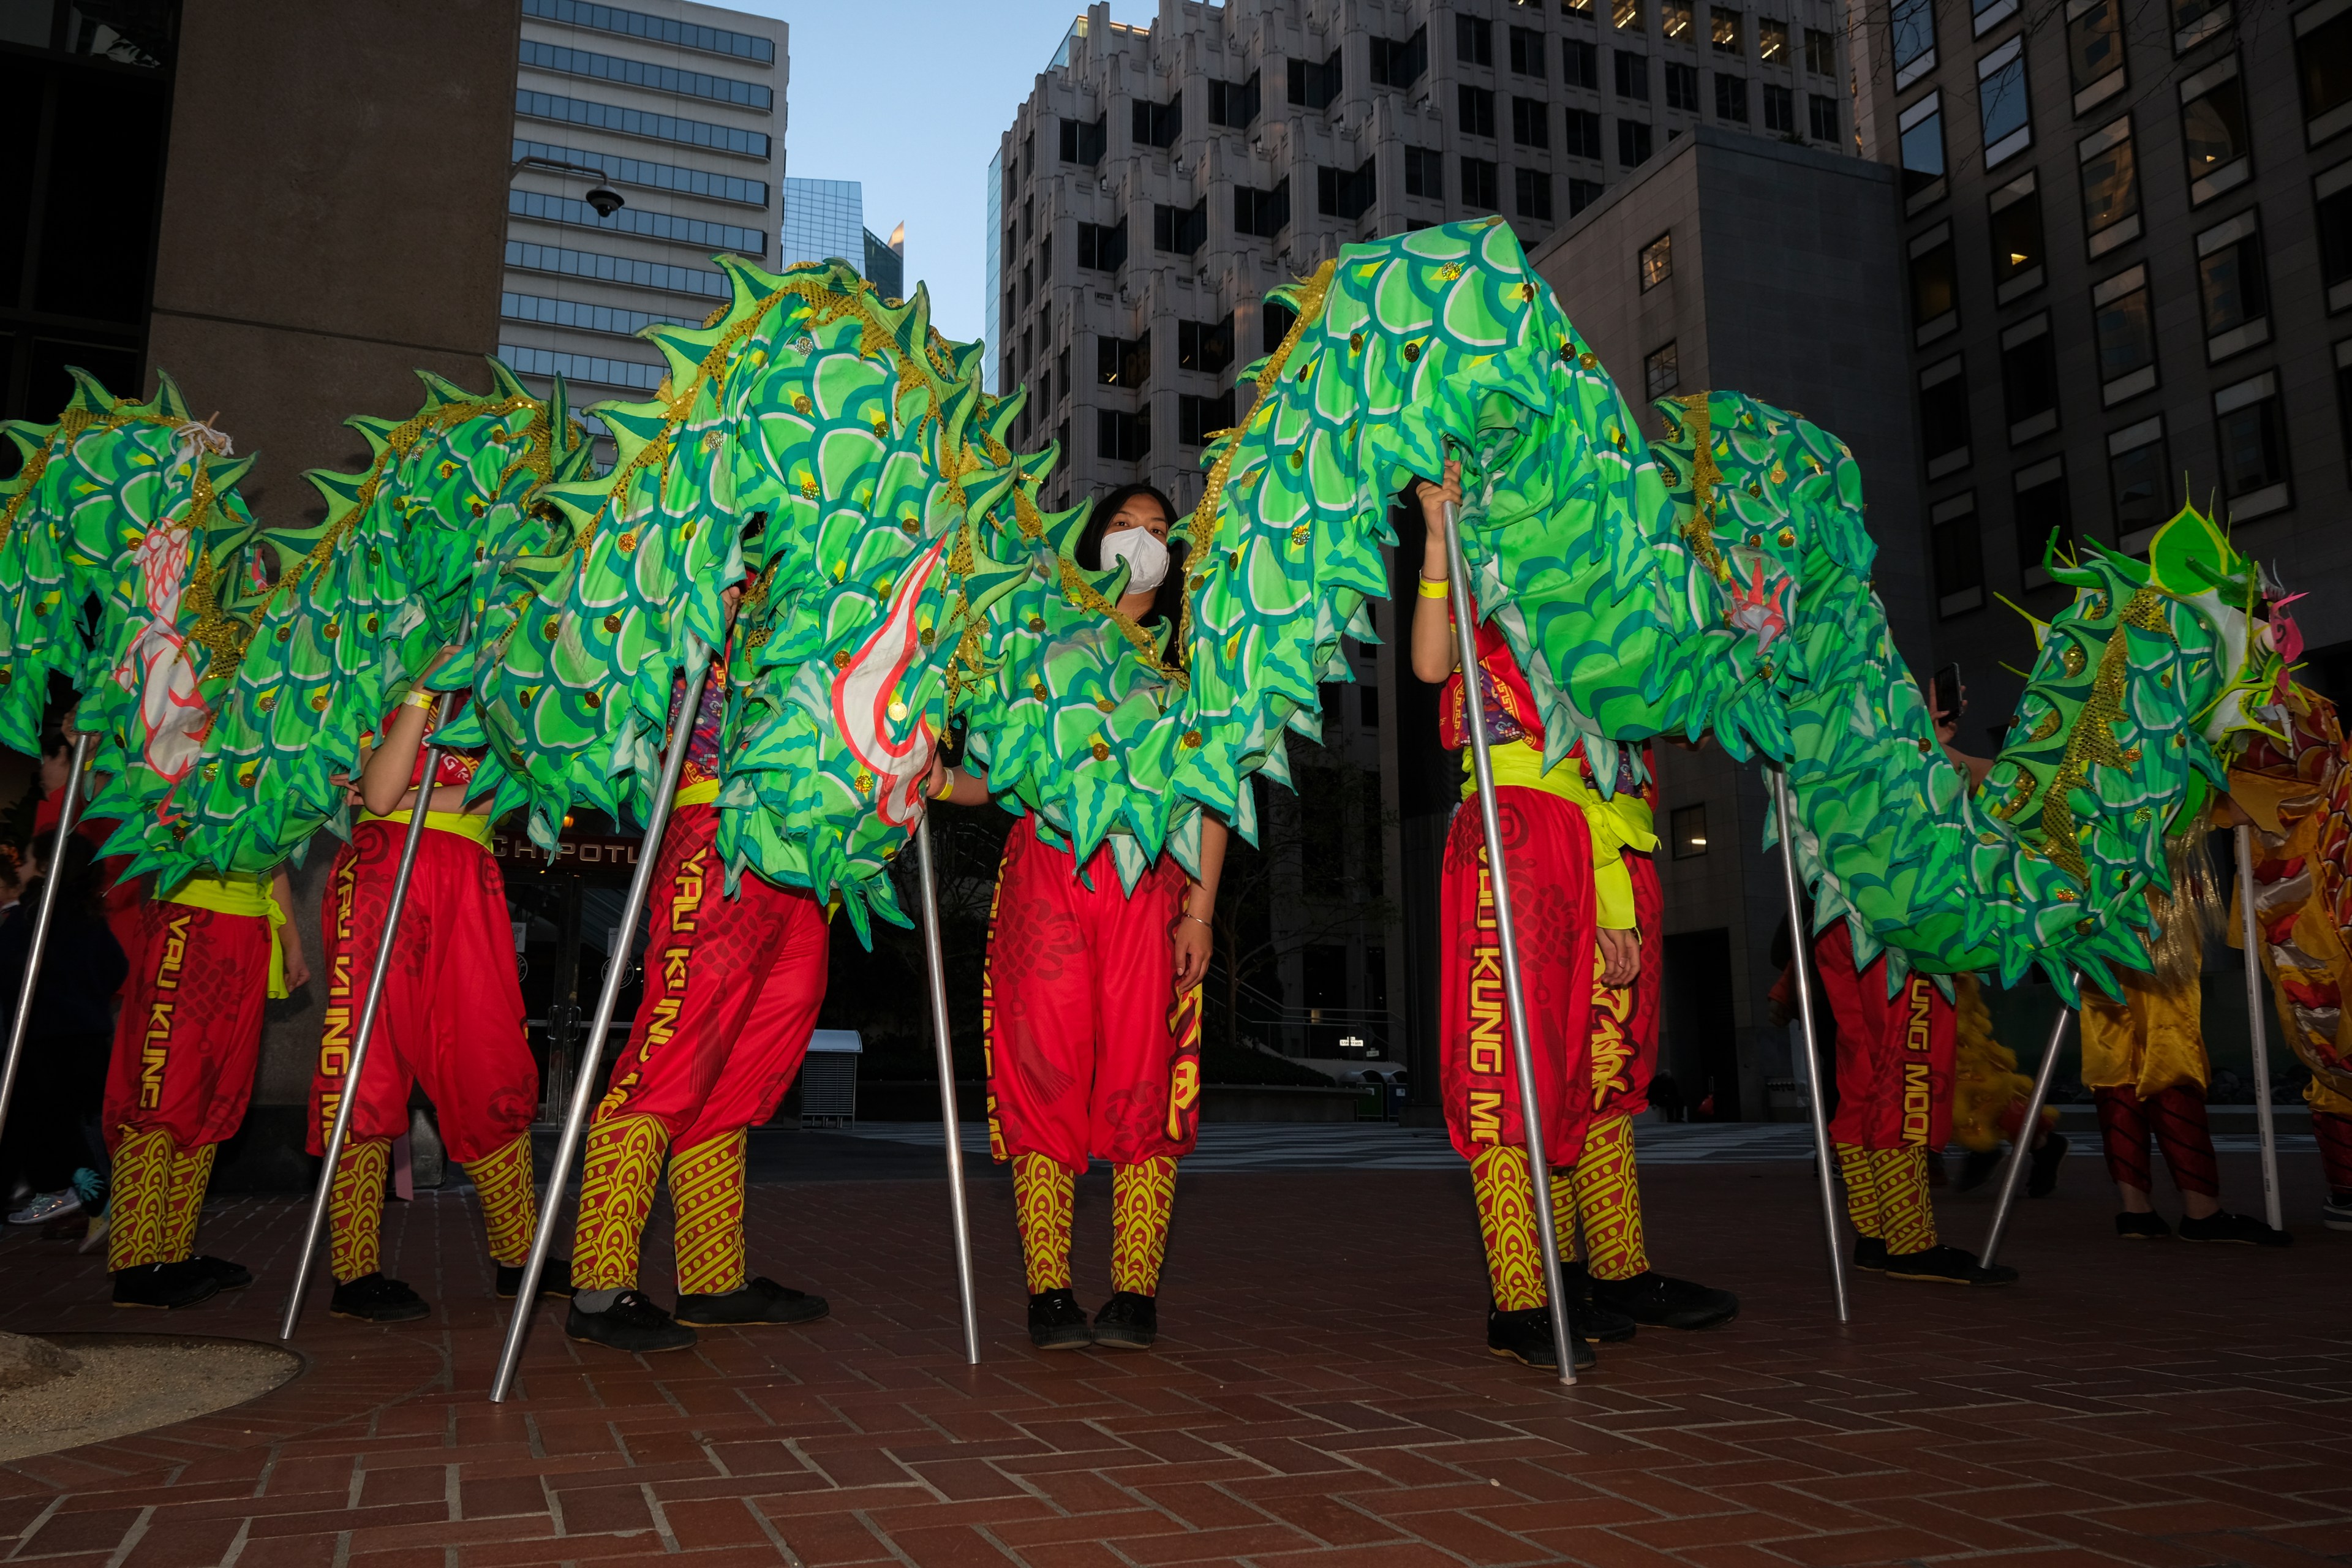 Performers in red and gold holding a long, green dragon costume, parading against an urban backdrop.